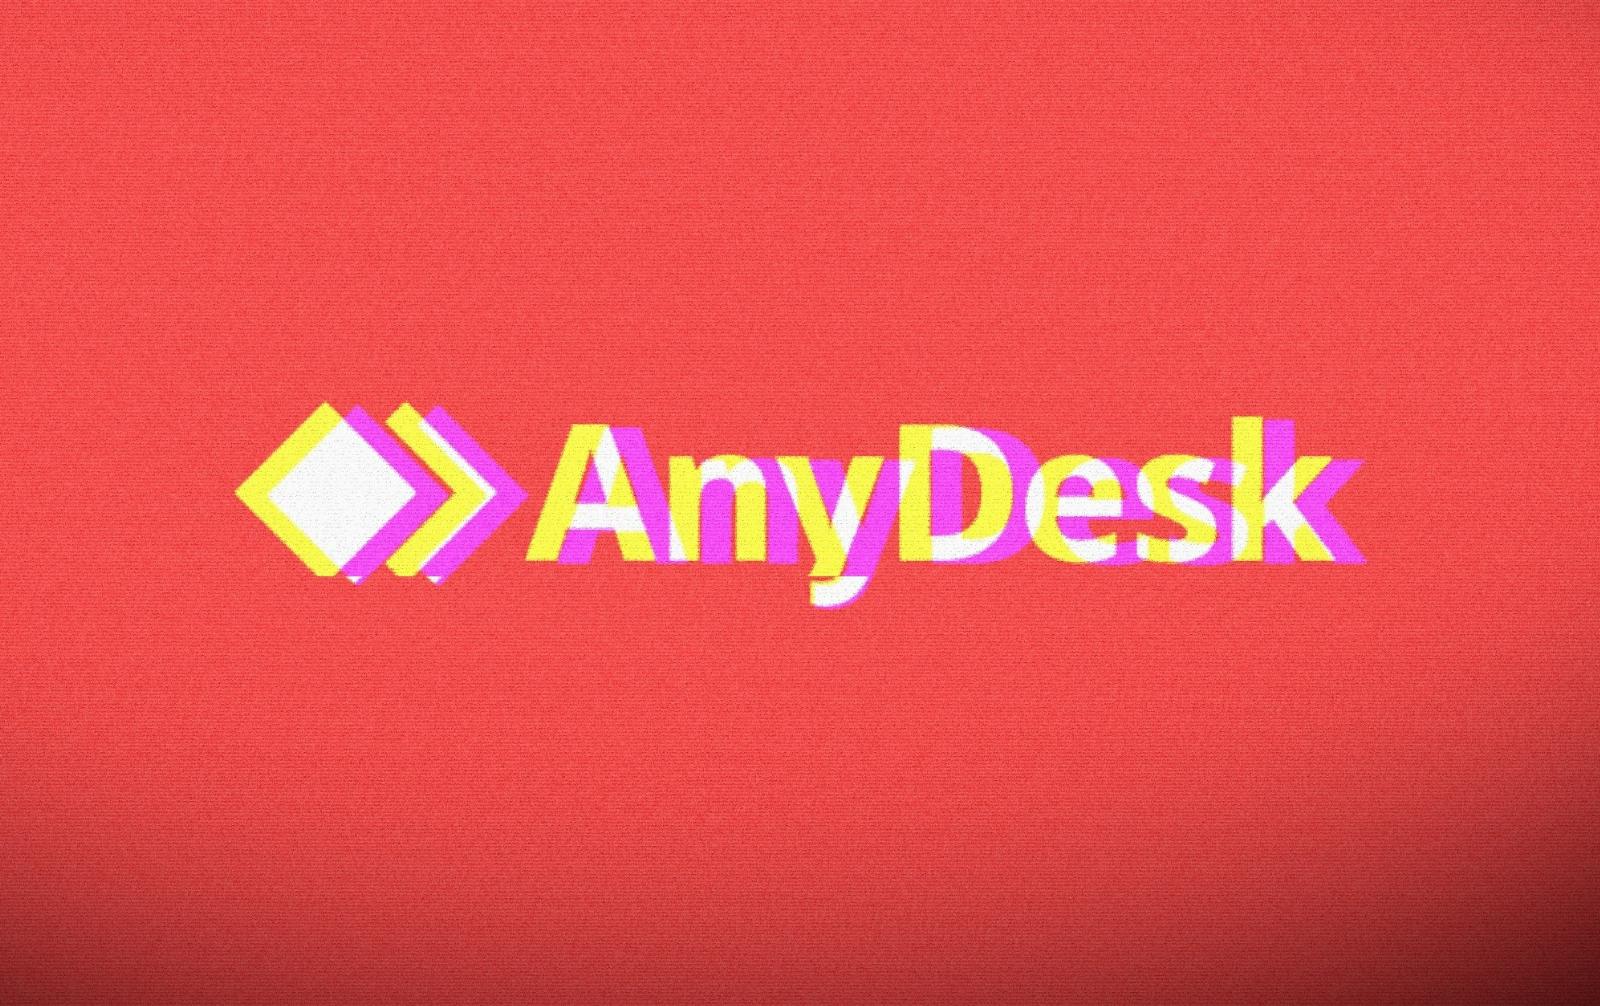 Remote access giant AnyDesk resets passwords and revokes certificates after hack